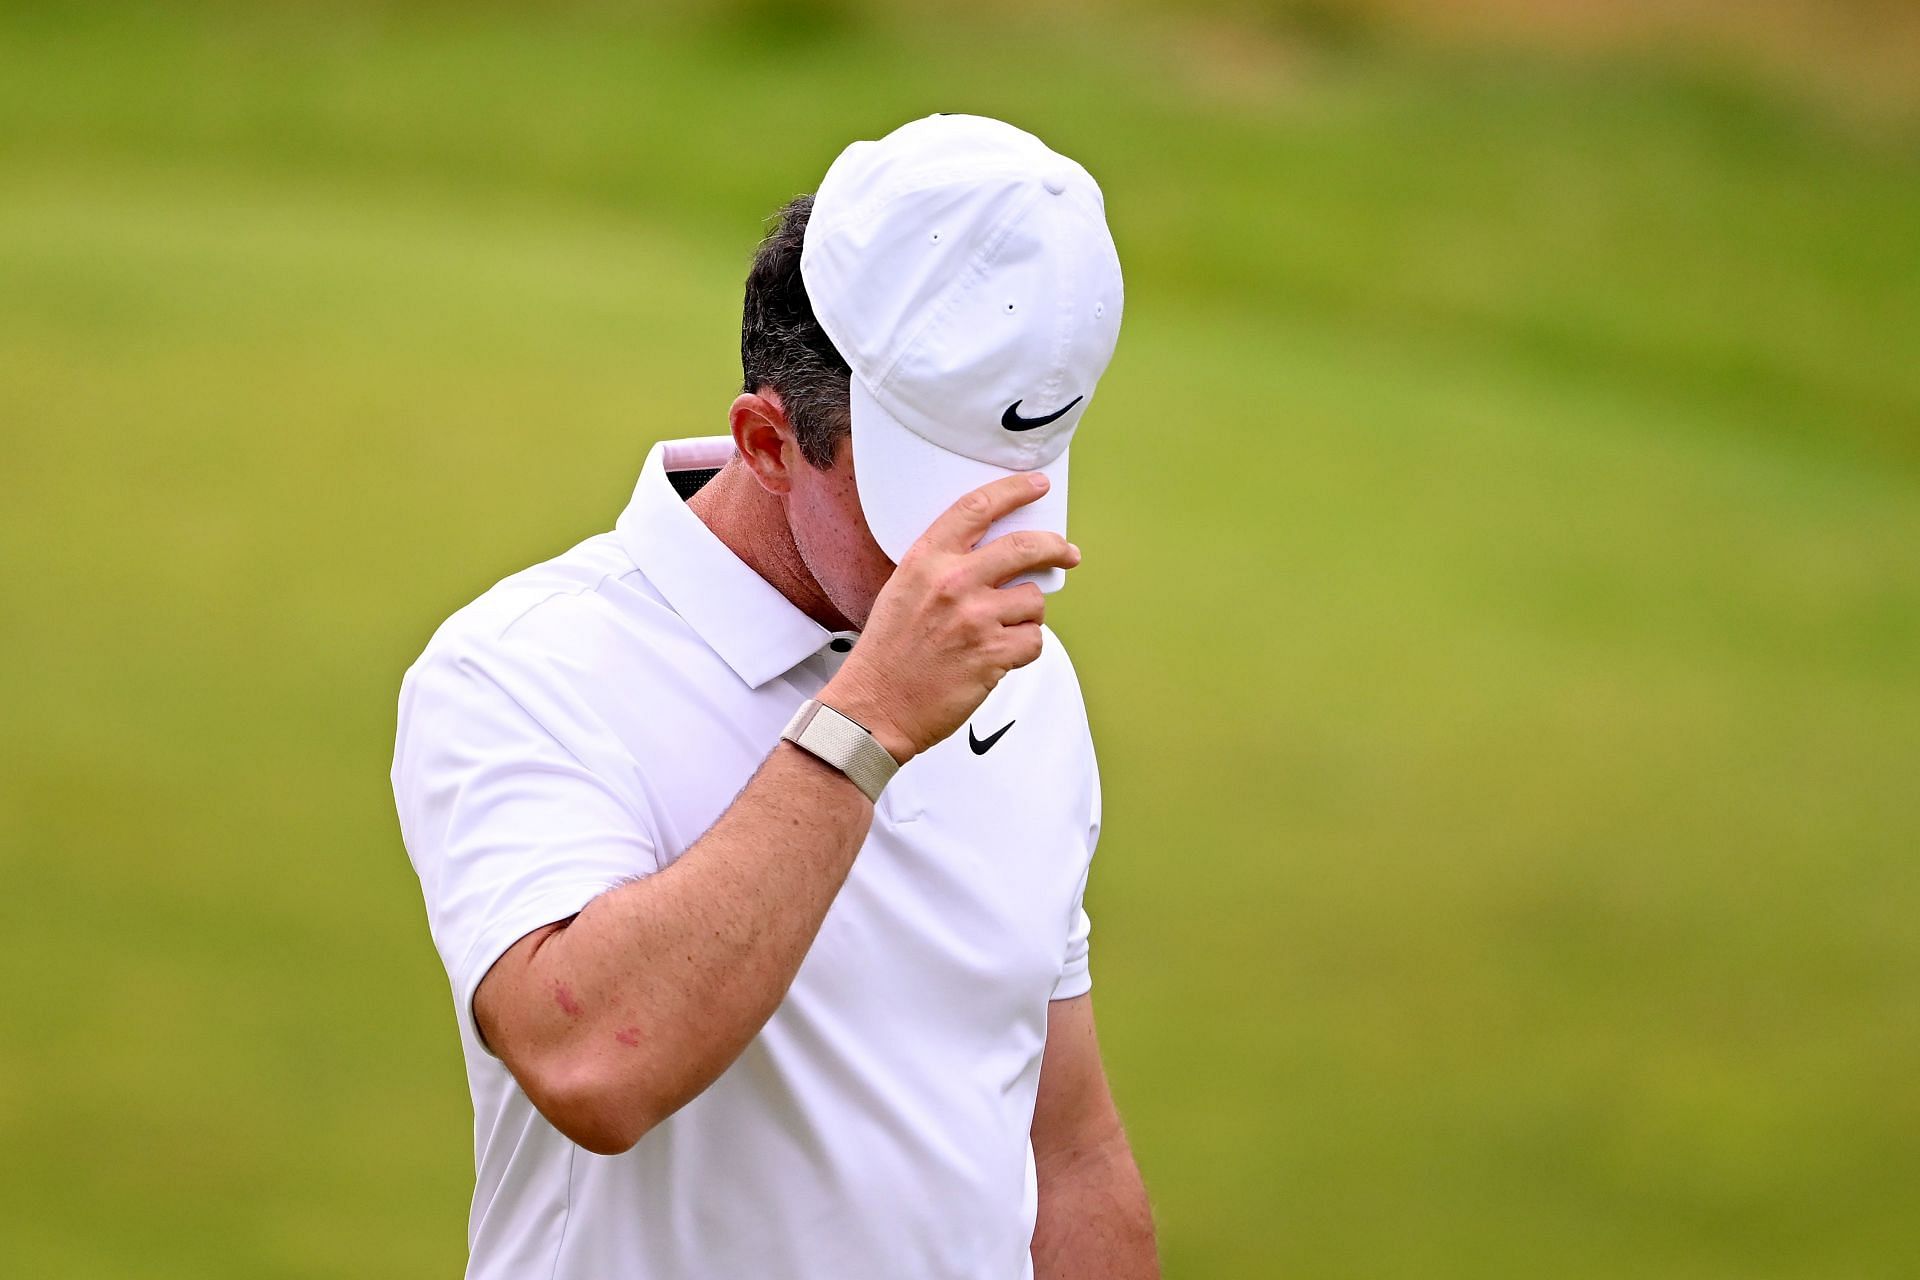 McIlroy was visibly disappointed with his game during the third round of the 2023 British Open